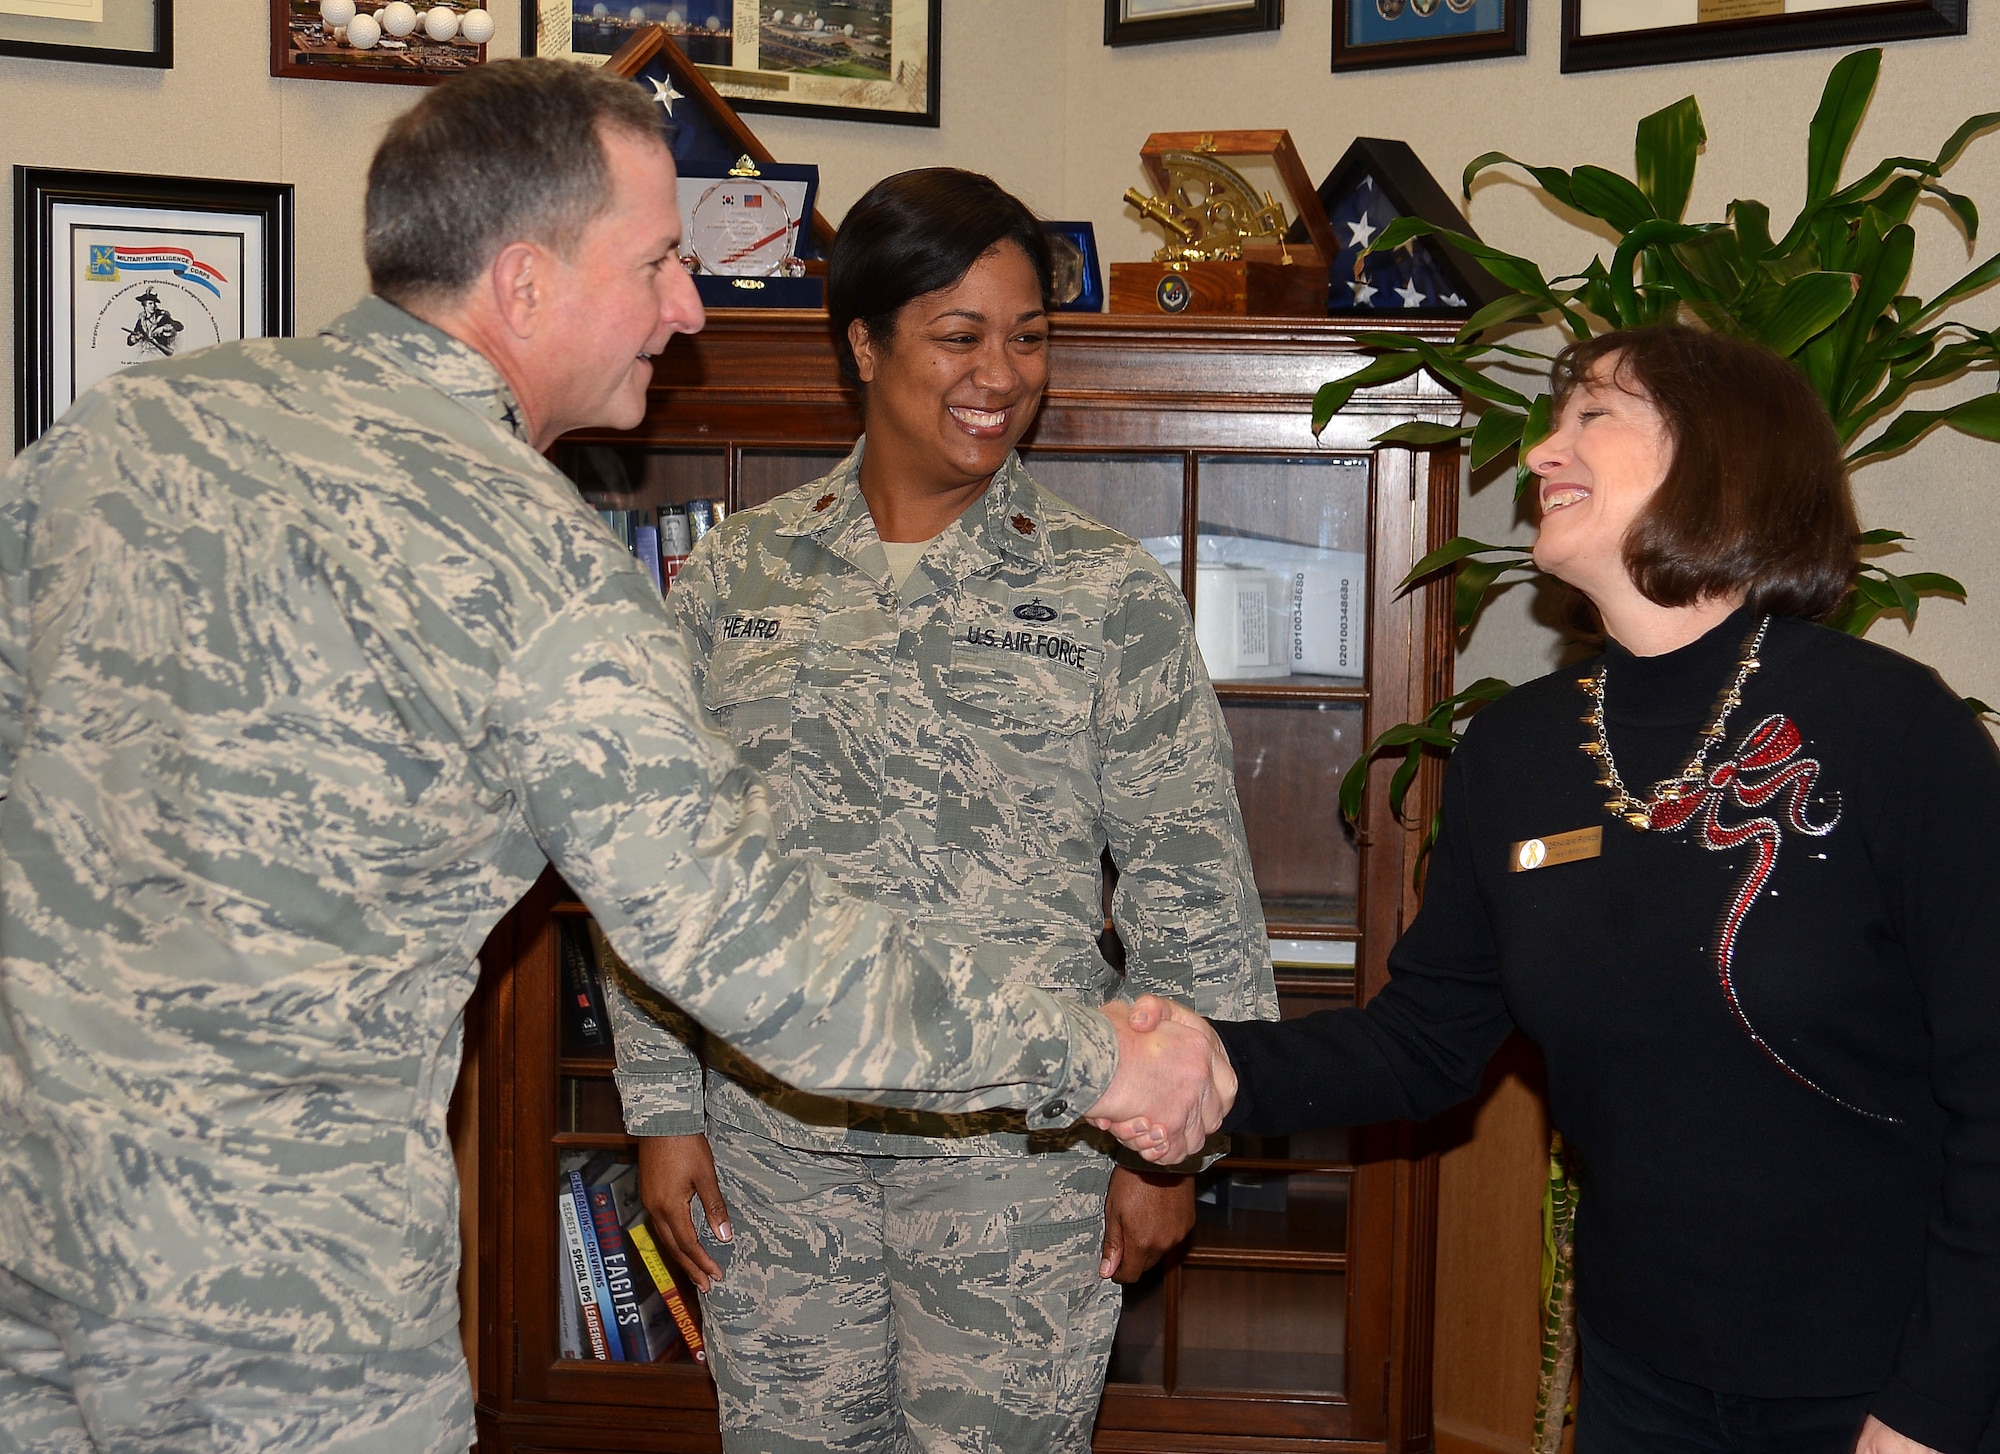 Air Force Chief of Staff Gen. David L. Goldfein presents his recognition coin to Maj. Octavia Heard, squadron section commander, and Carol Glover, spouse of 25th Air Force Command Chaplain (Col.) Bruce Glover and Key Spouse coordinator, during his visit to San Antonio, Texas, Dec. 19.